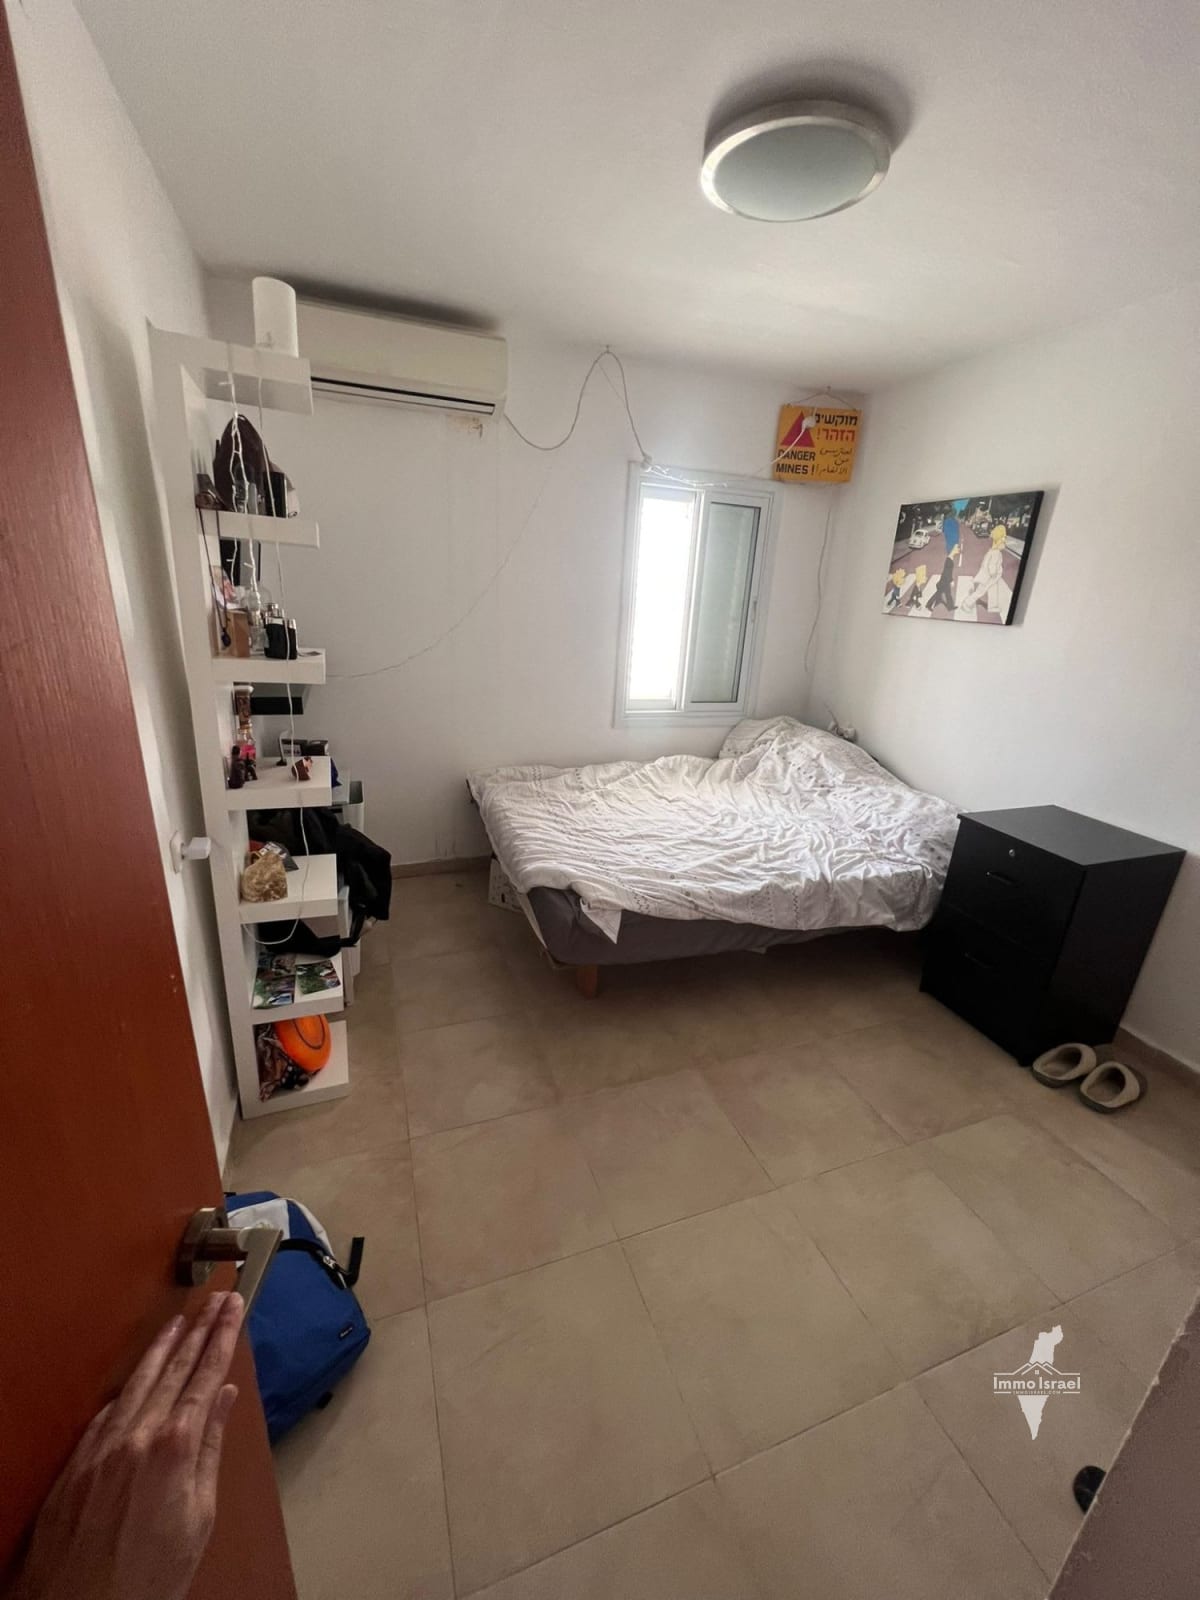 Investment Property in Beer Sheva Leased by Students